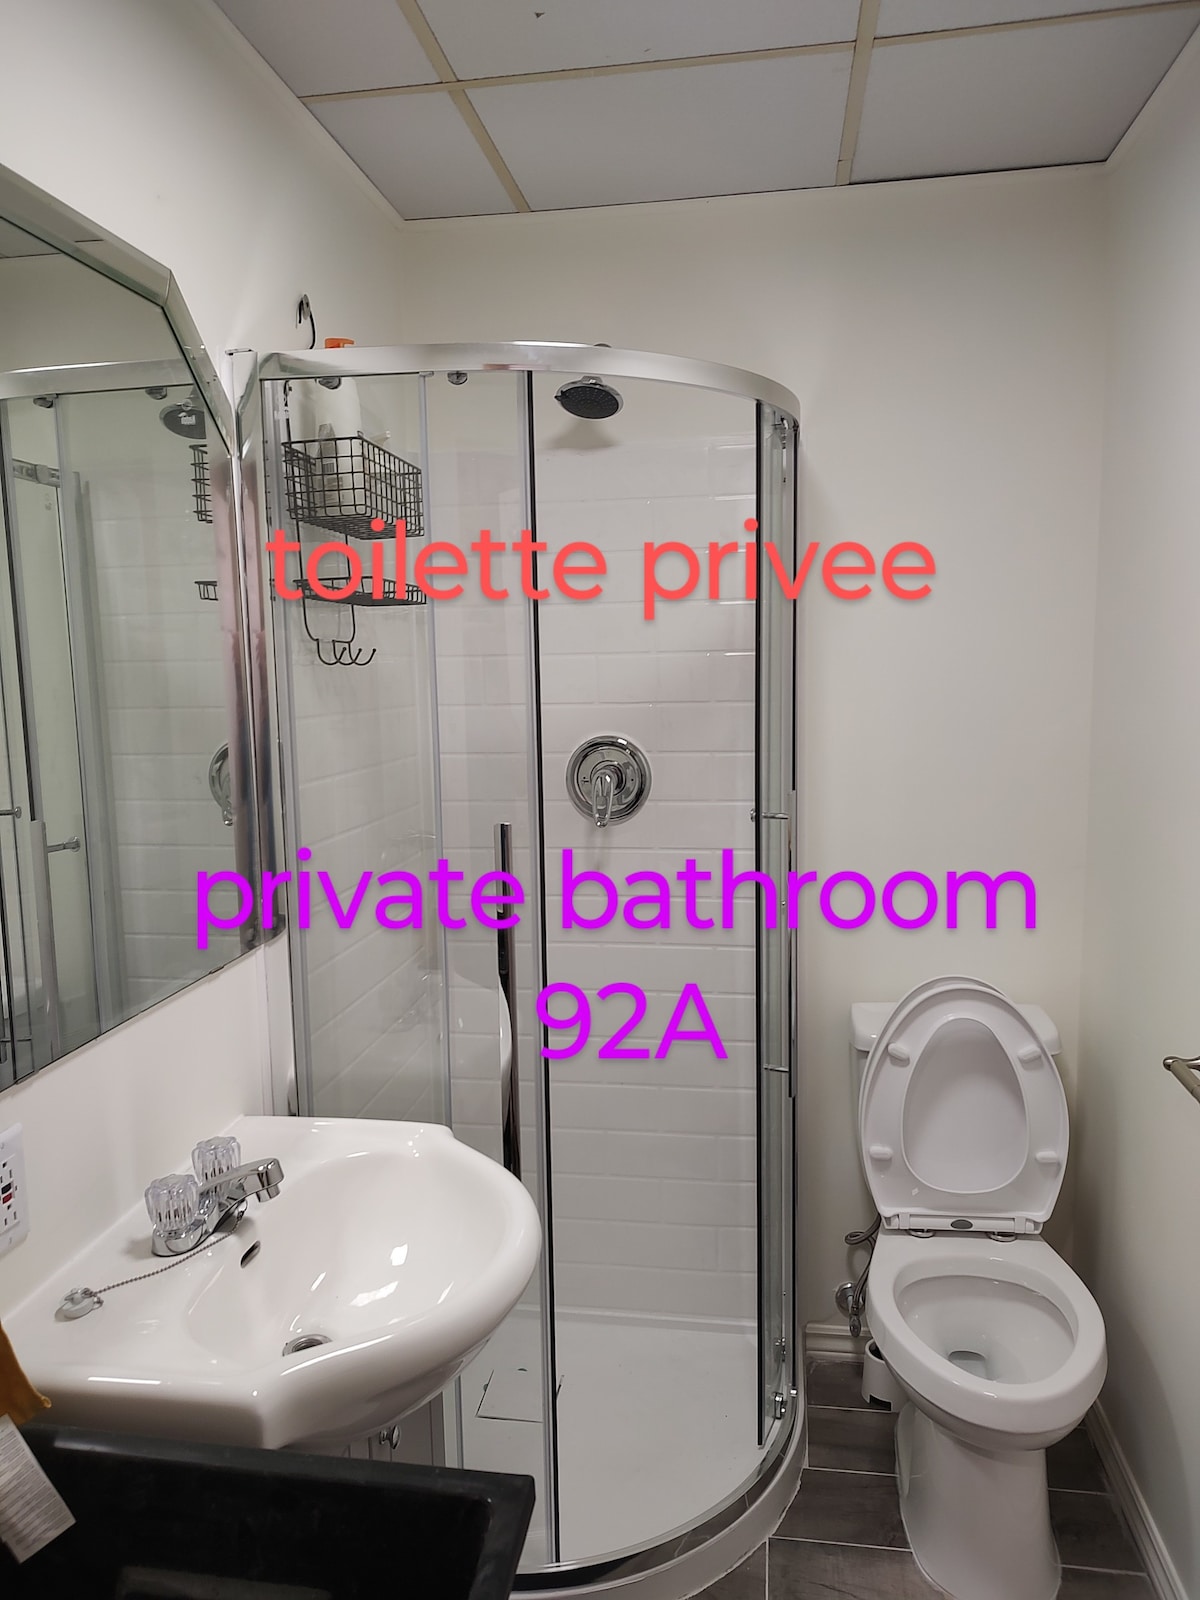 separate  suite+2 people+one fixed parking  92A1